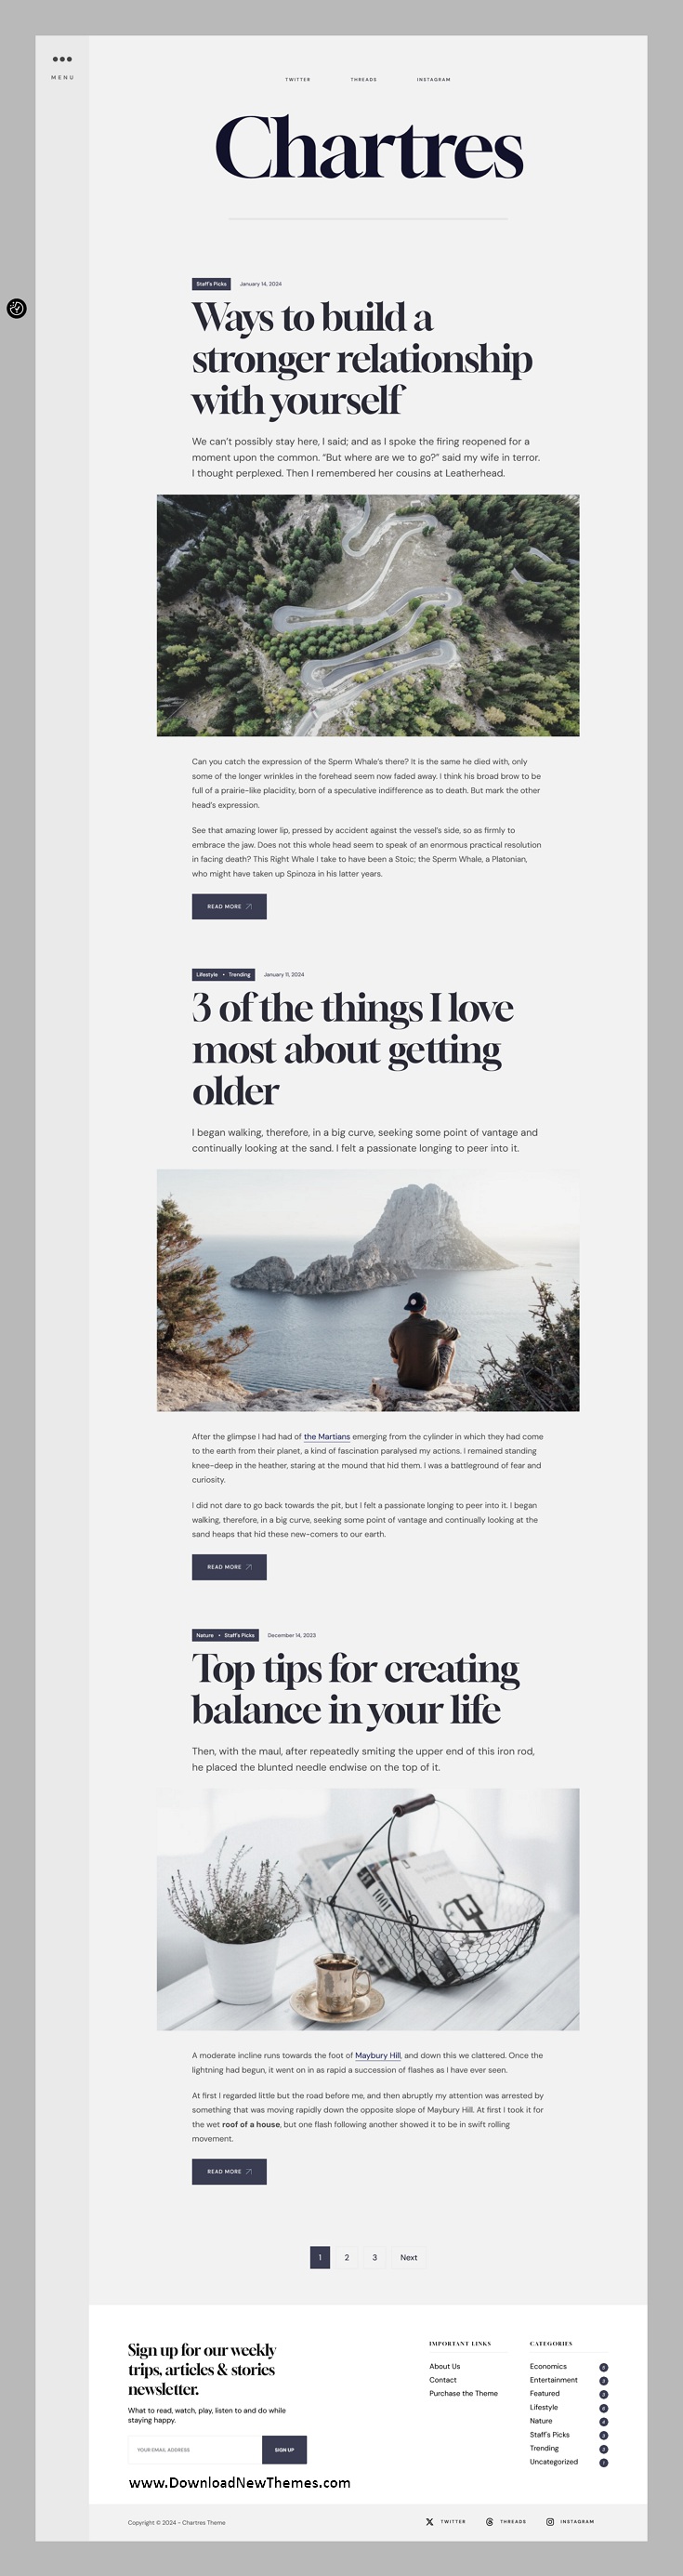 Chartres - Timeless Minimalist Blog Theme Review